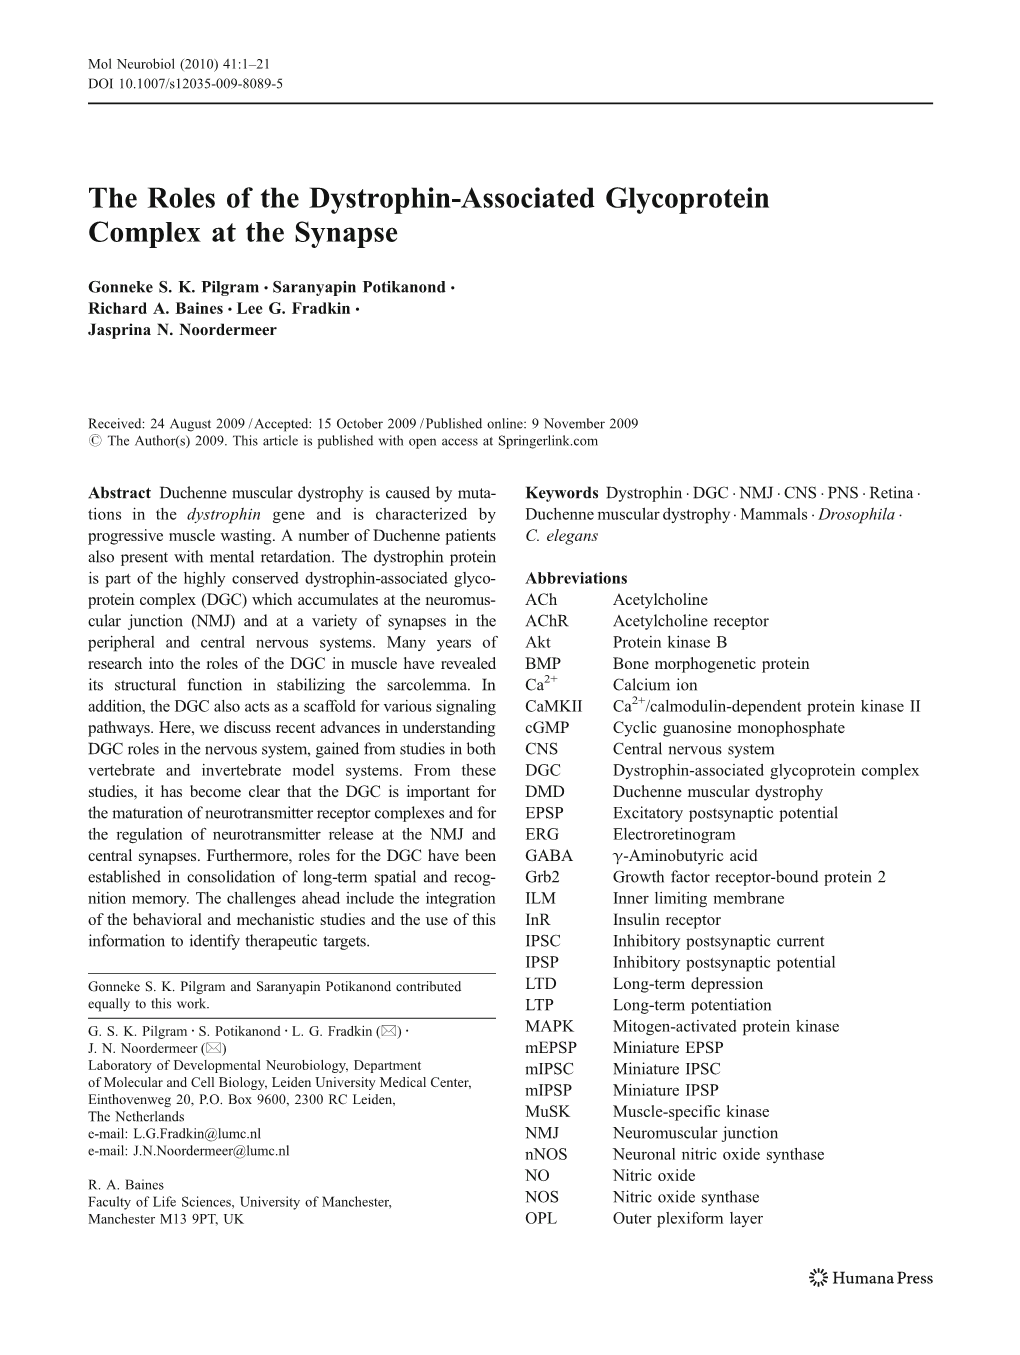 The Roles of the Dystrophin-Associated Glycoprotein Complex at the Synapse